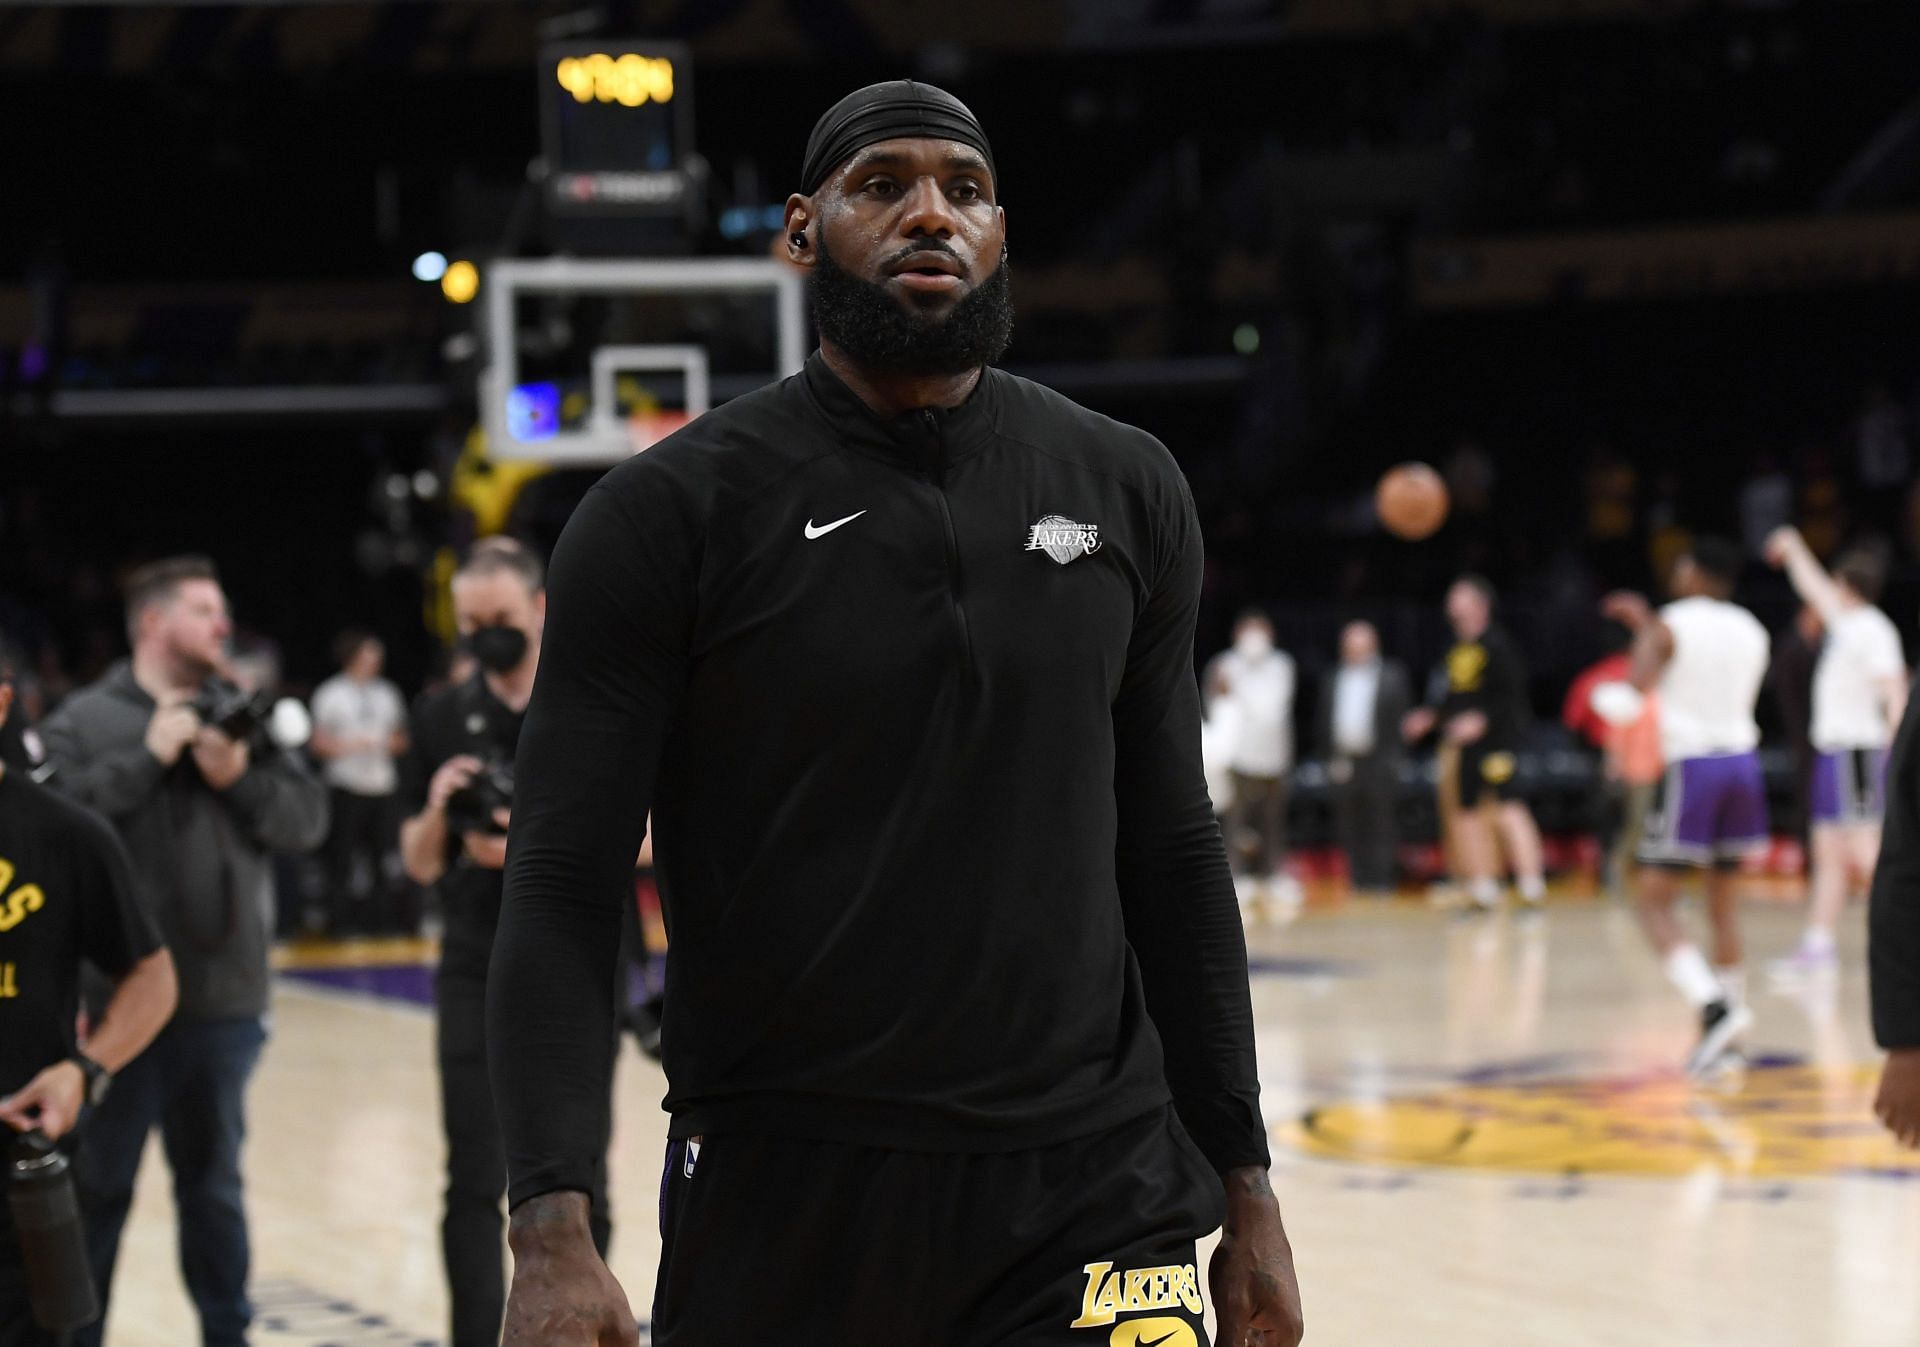 LeBron James warms up before New Orleans Pelicans-LA Lakers game on Friday